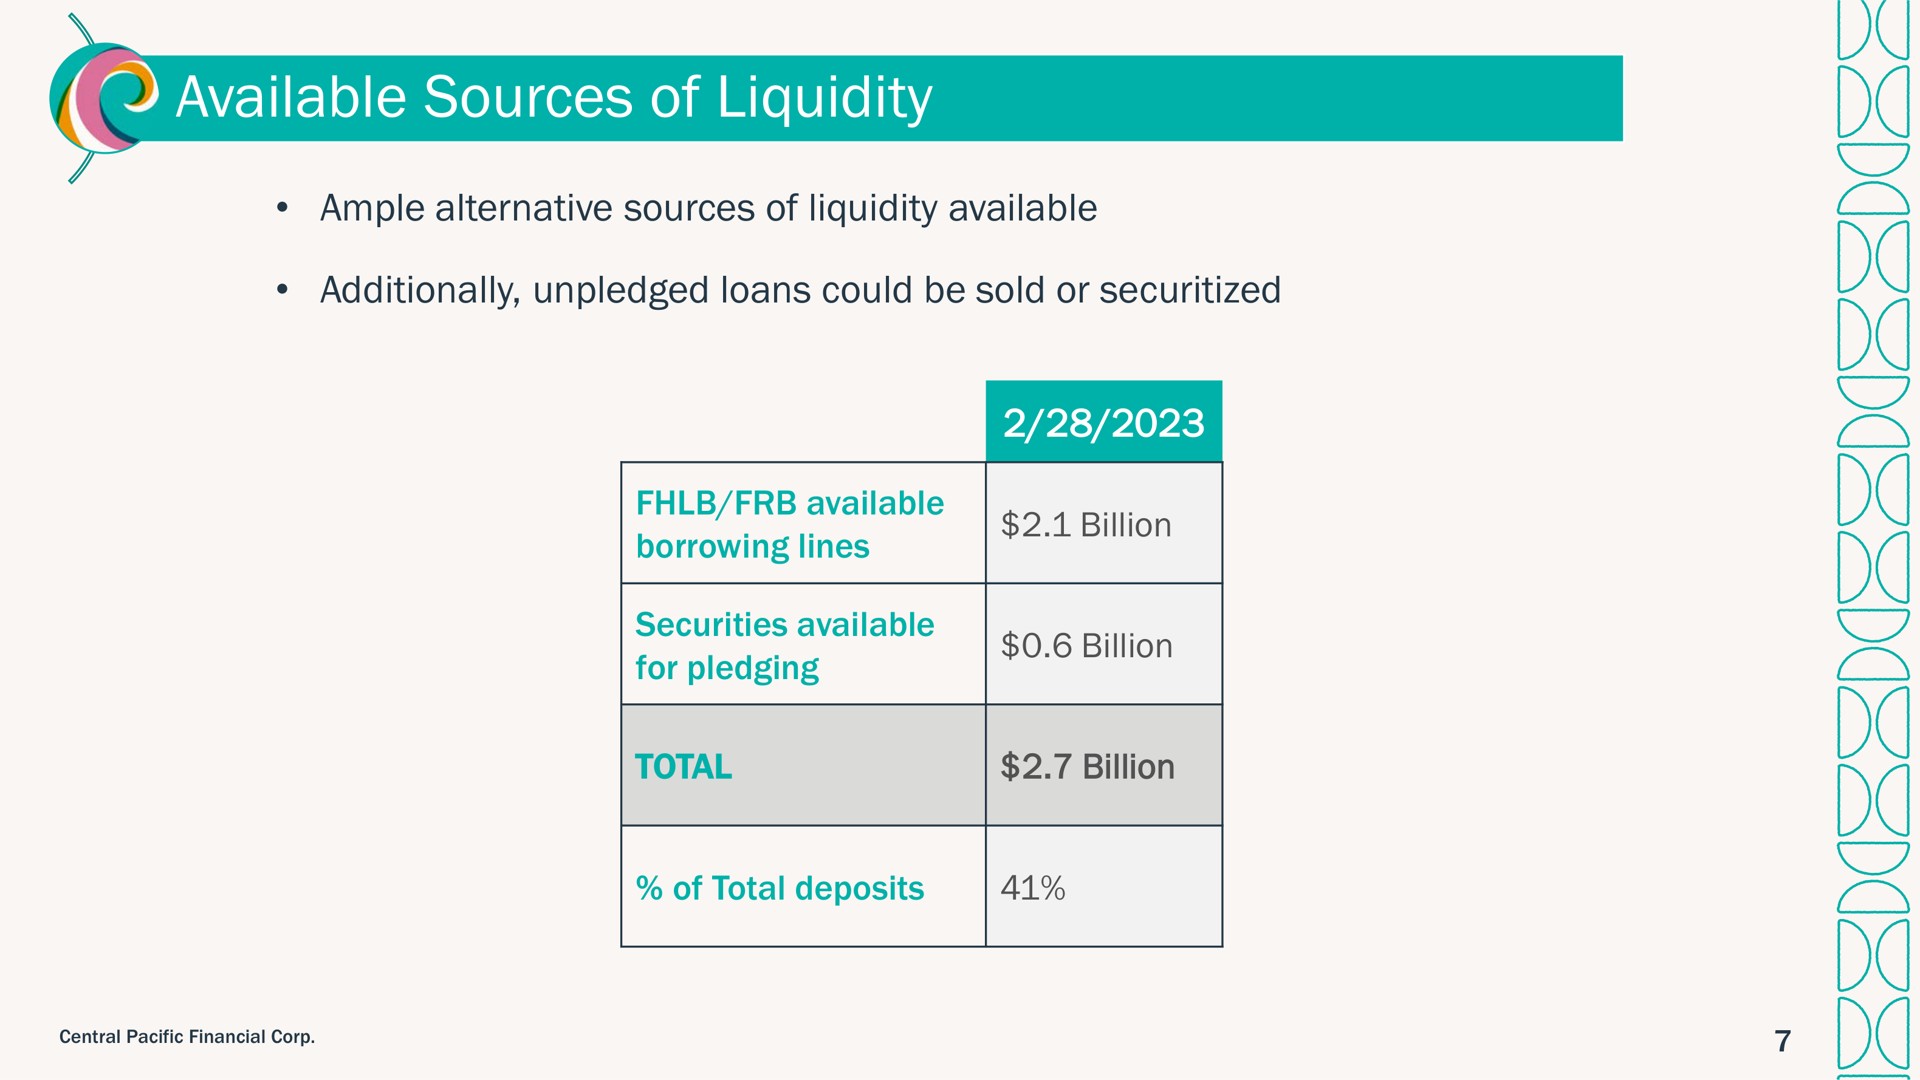 available sources of liquidity | Central Pacific Financial